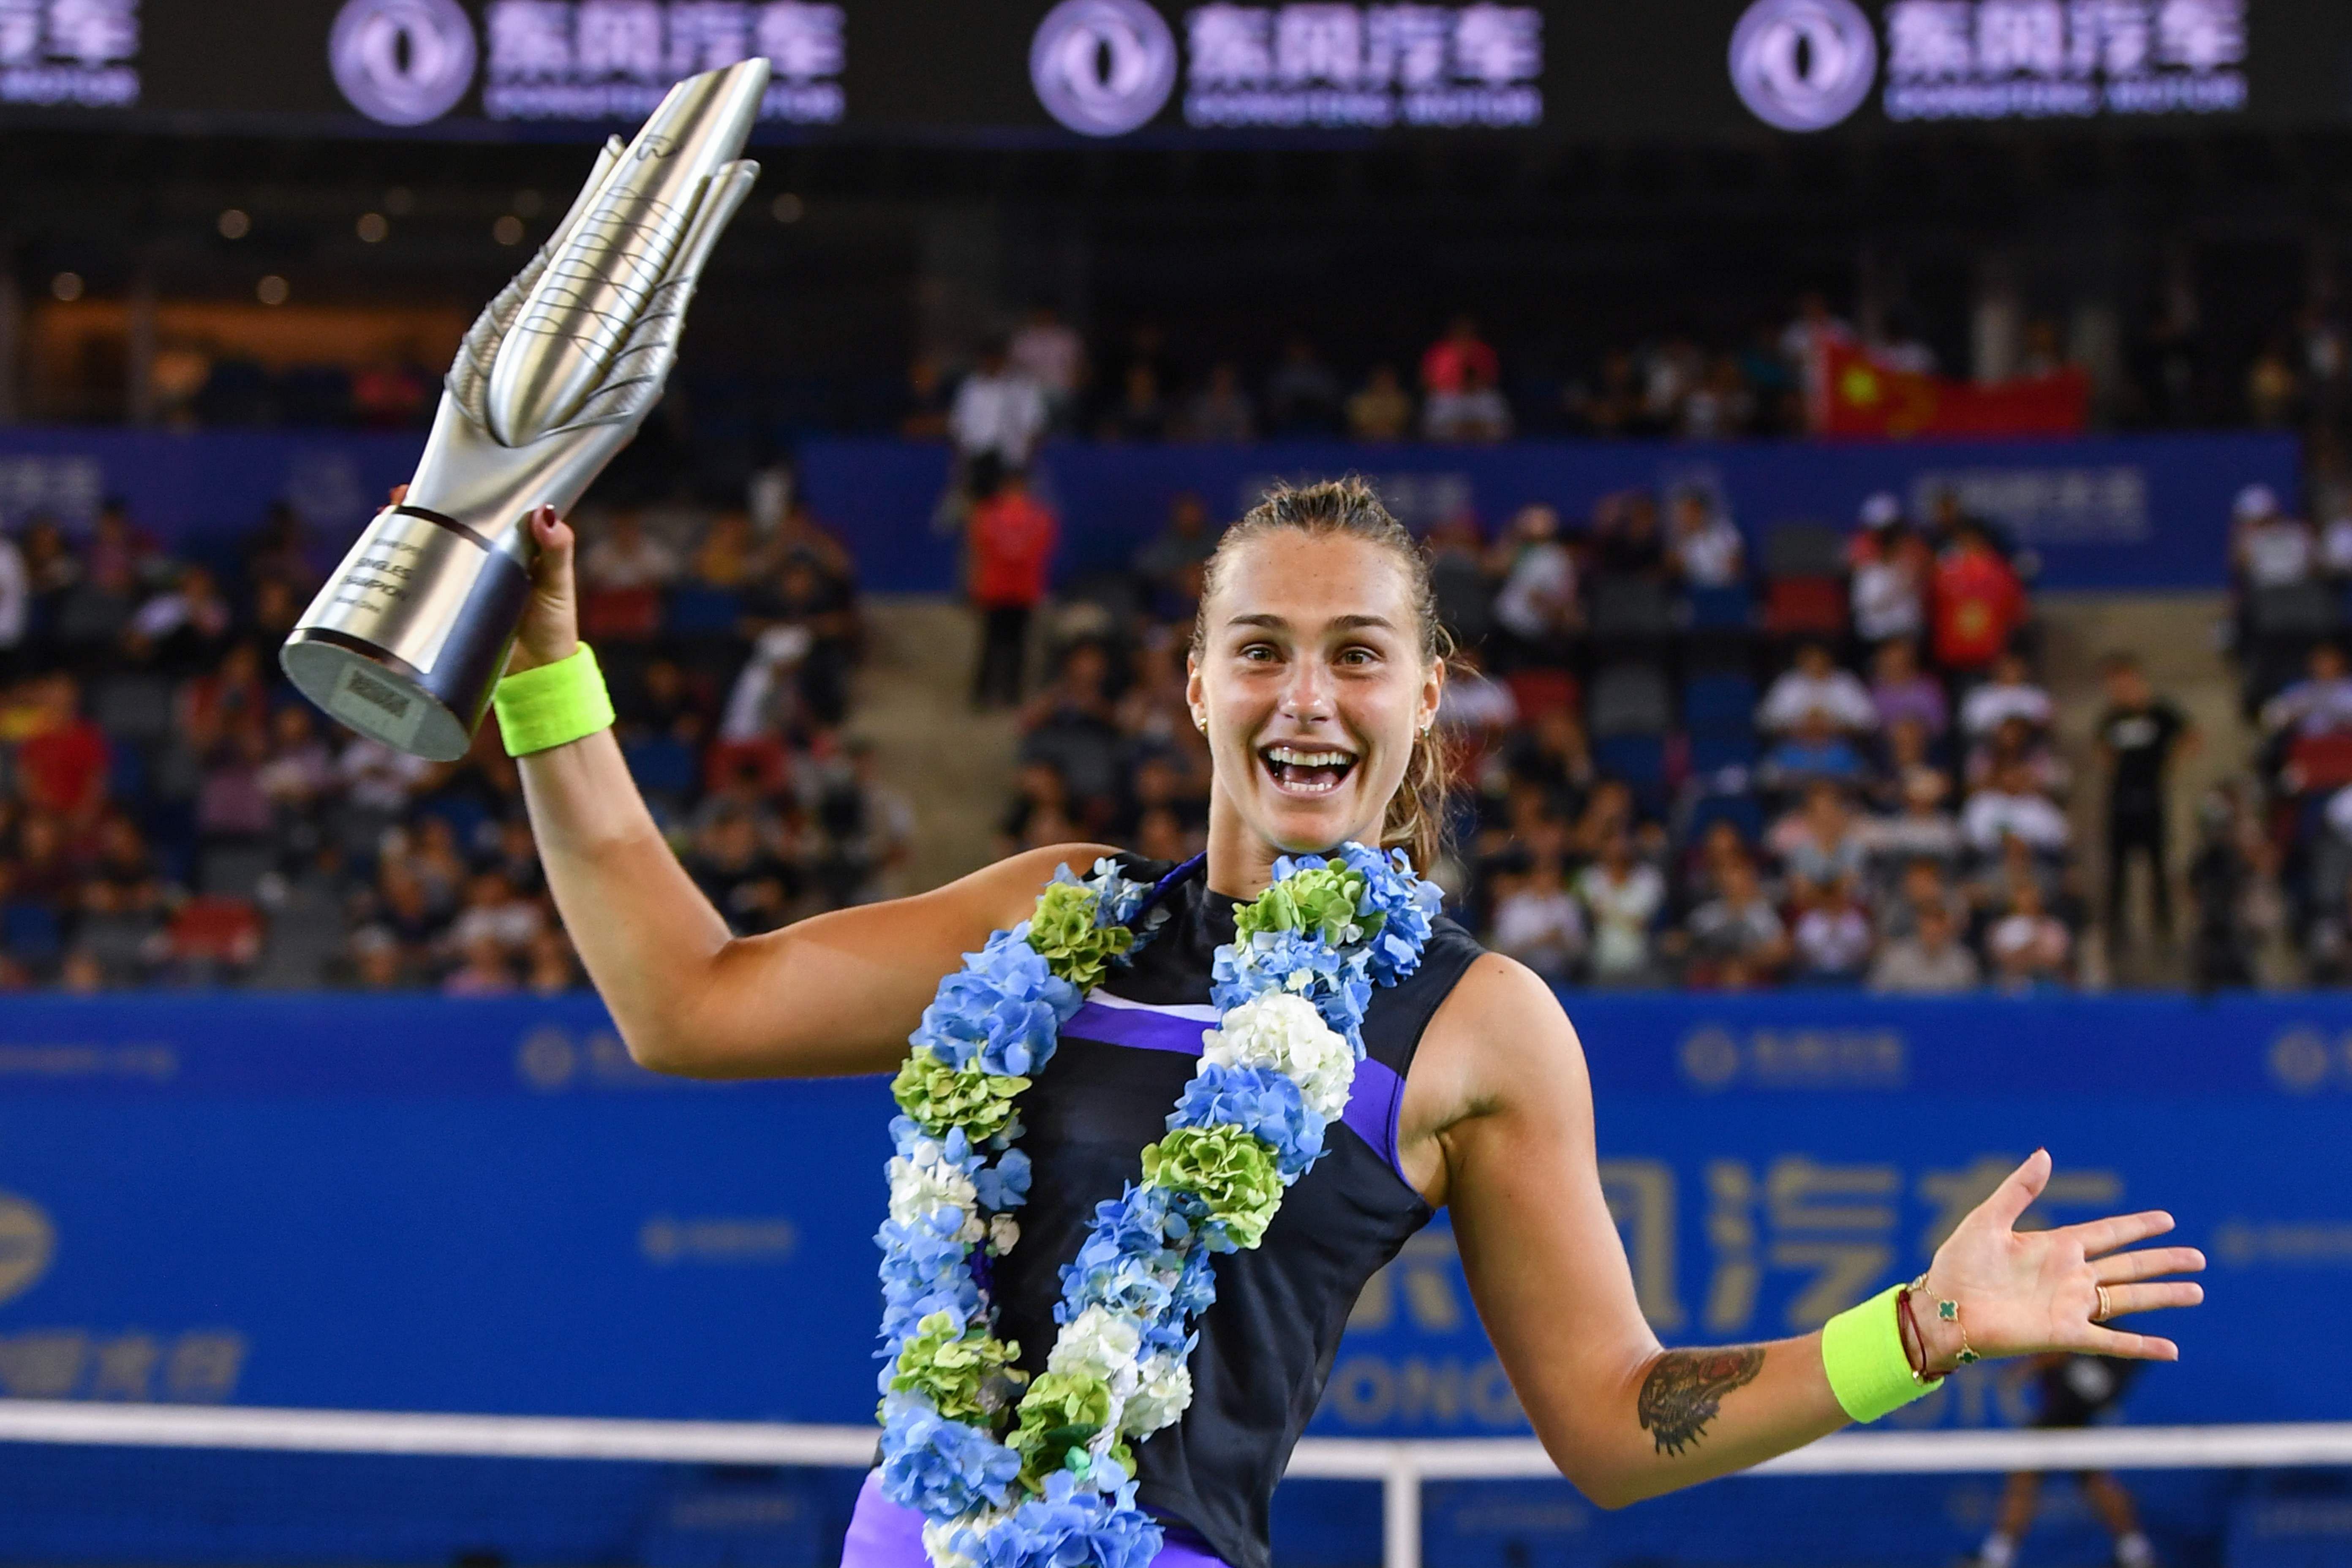 Aryna Sabalenka of Belarus holds the trophy after her victory in the women's singles final match against Alison Riske of the US at the Wuhan Open tennis tournament in Wuhan. (AFP PHoto)